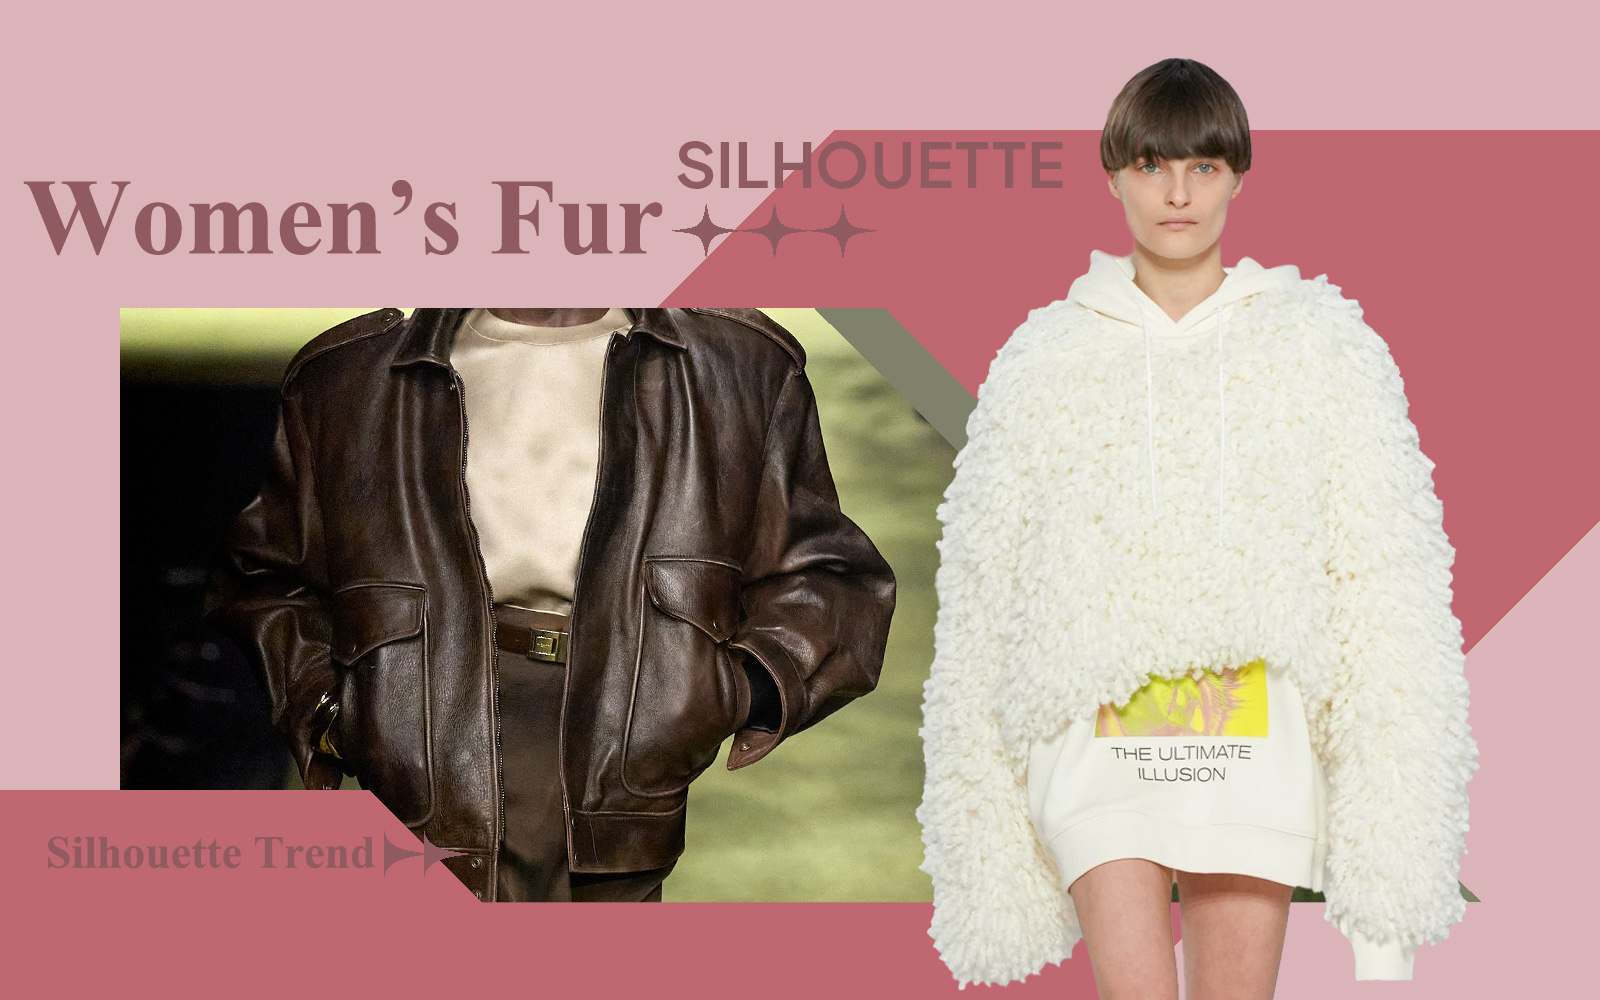 Daily Overture -- The Silhouette Trend for Women's Fur